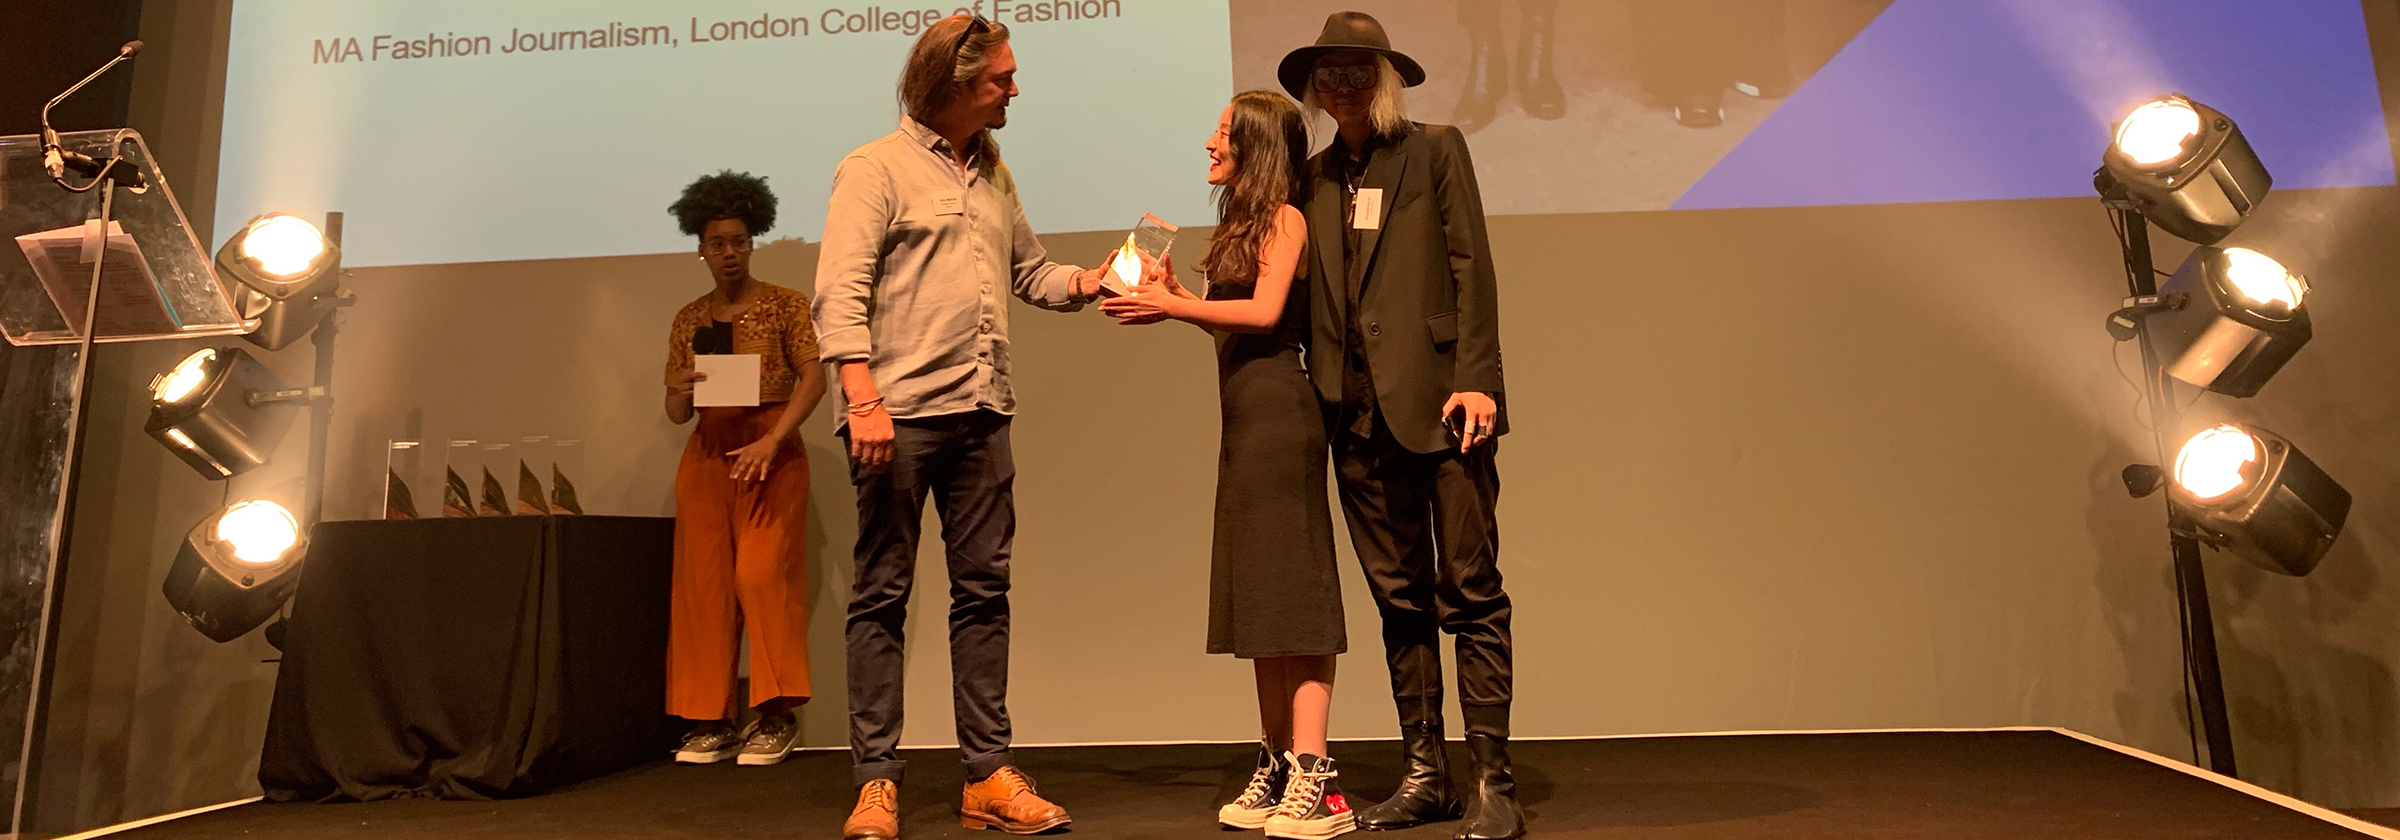 MA Fashion Journalism students win at the Creative Enterprise Awards 2019